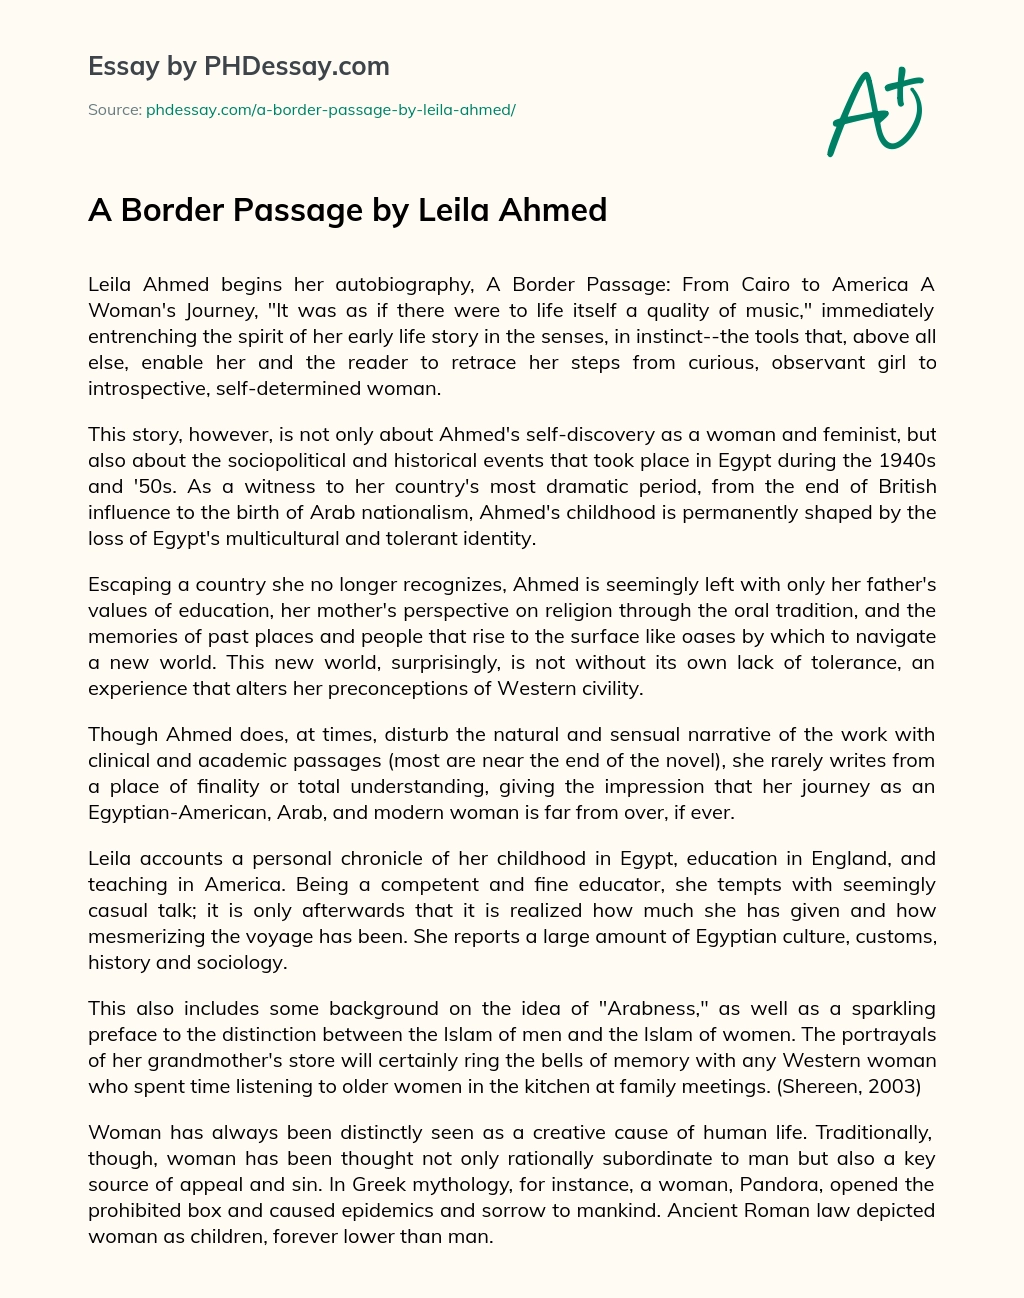 A Border Passage by Leila Ahmed essay